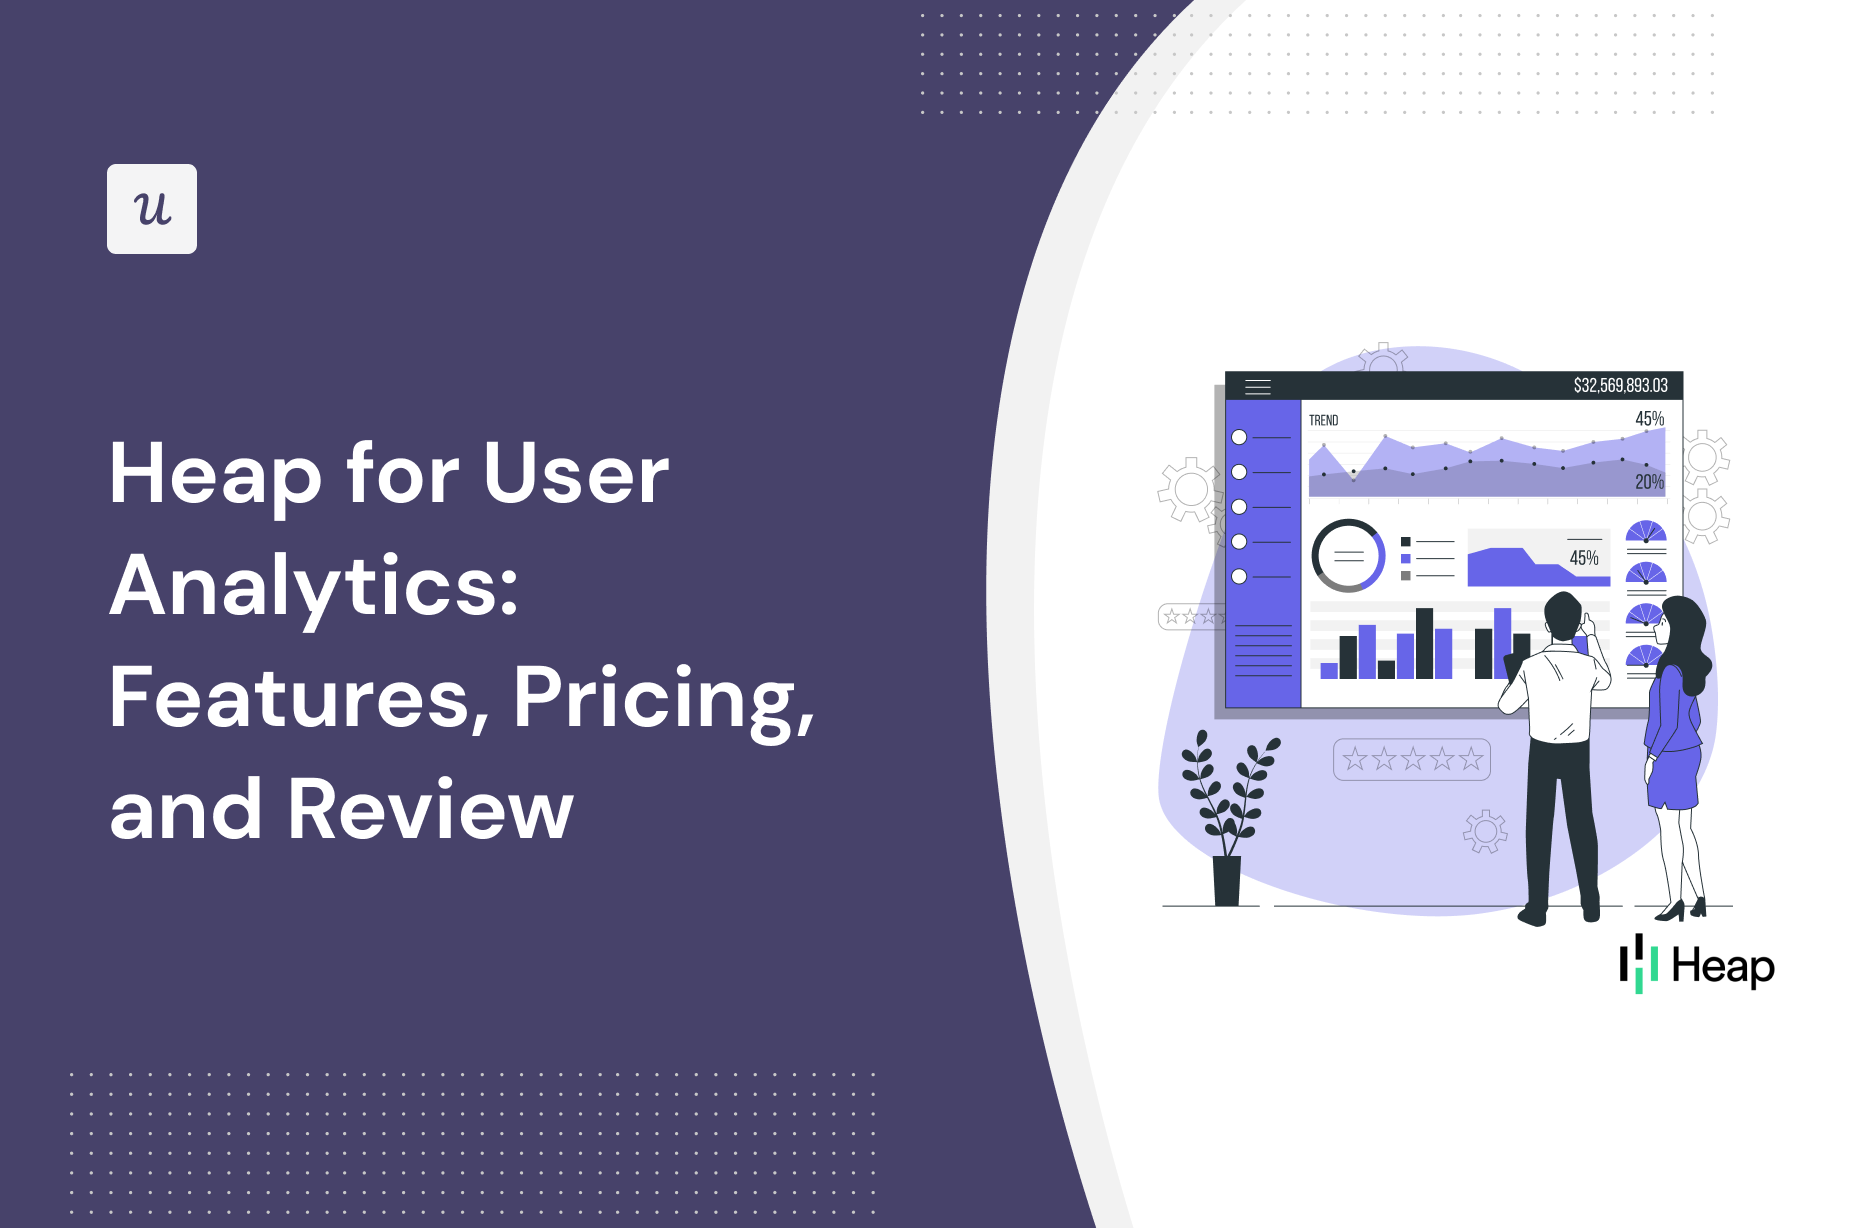 Heap for User Analytics: Features, Pricing, and Review